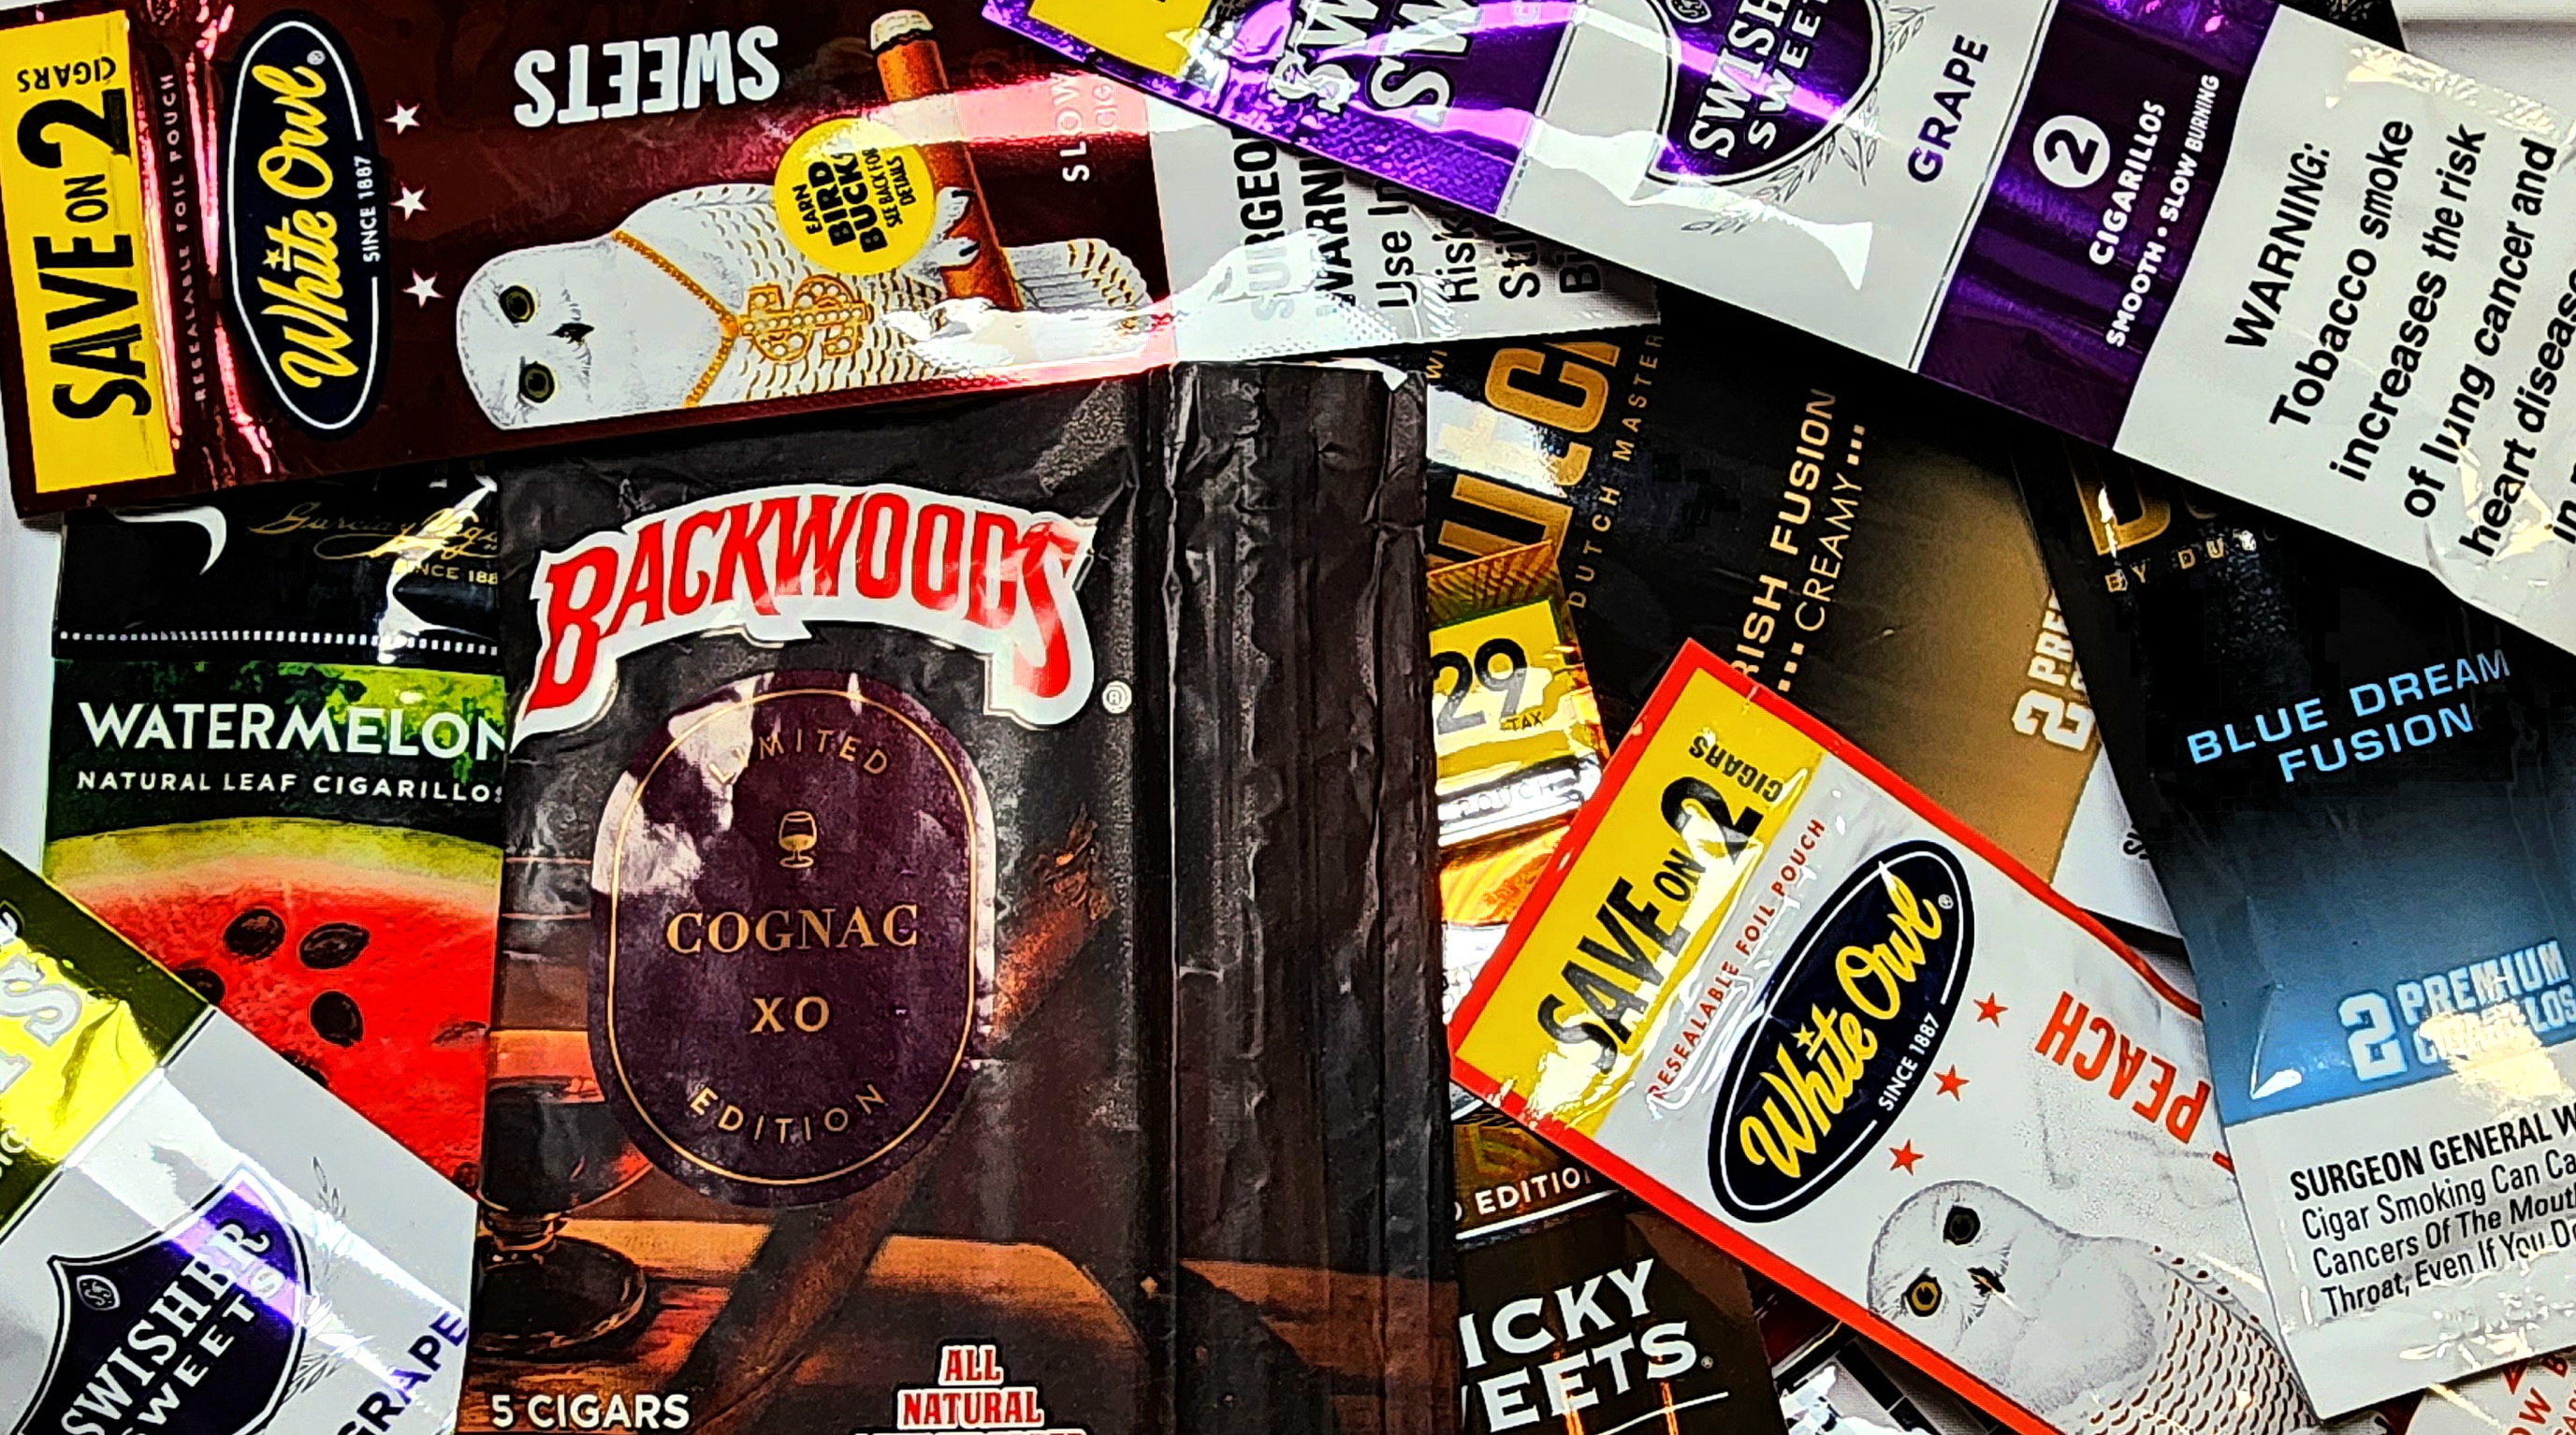 An assortment of flavored cigars purchased in Los Angeles in October.